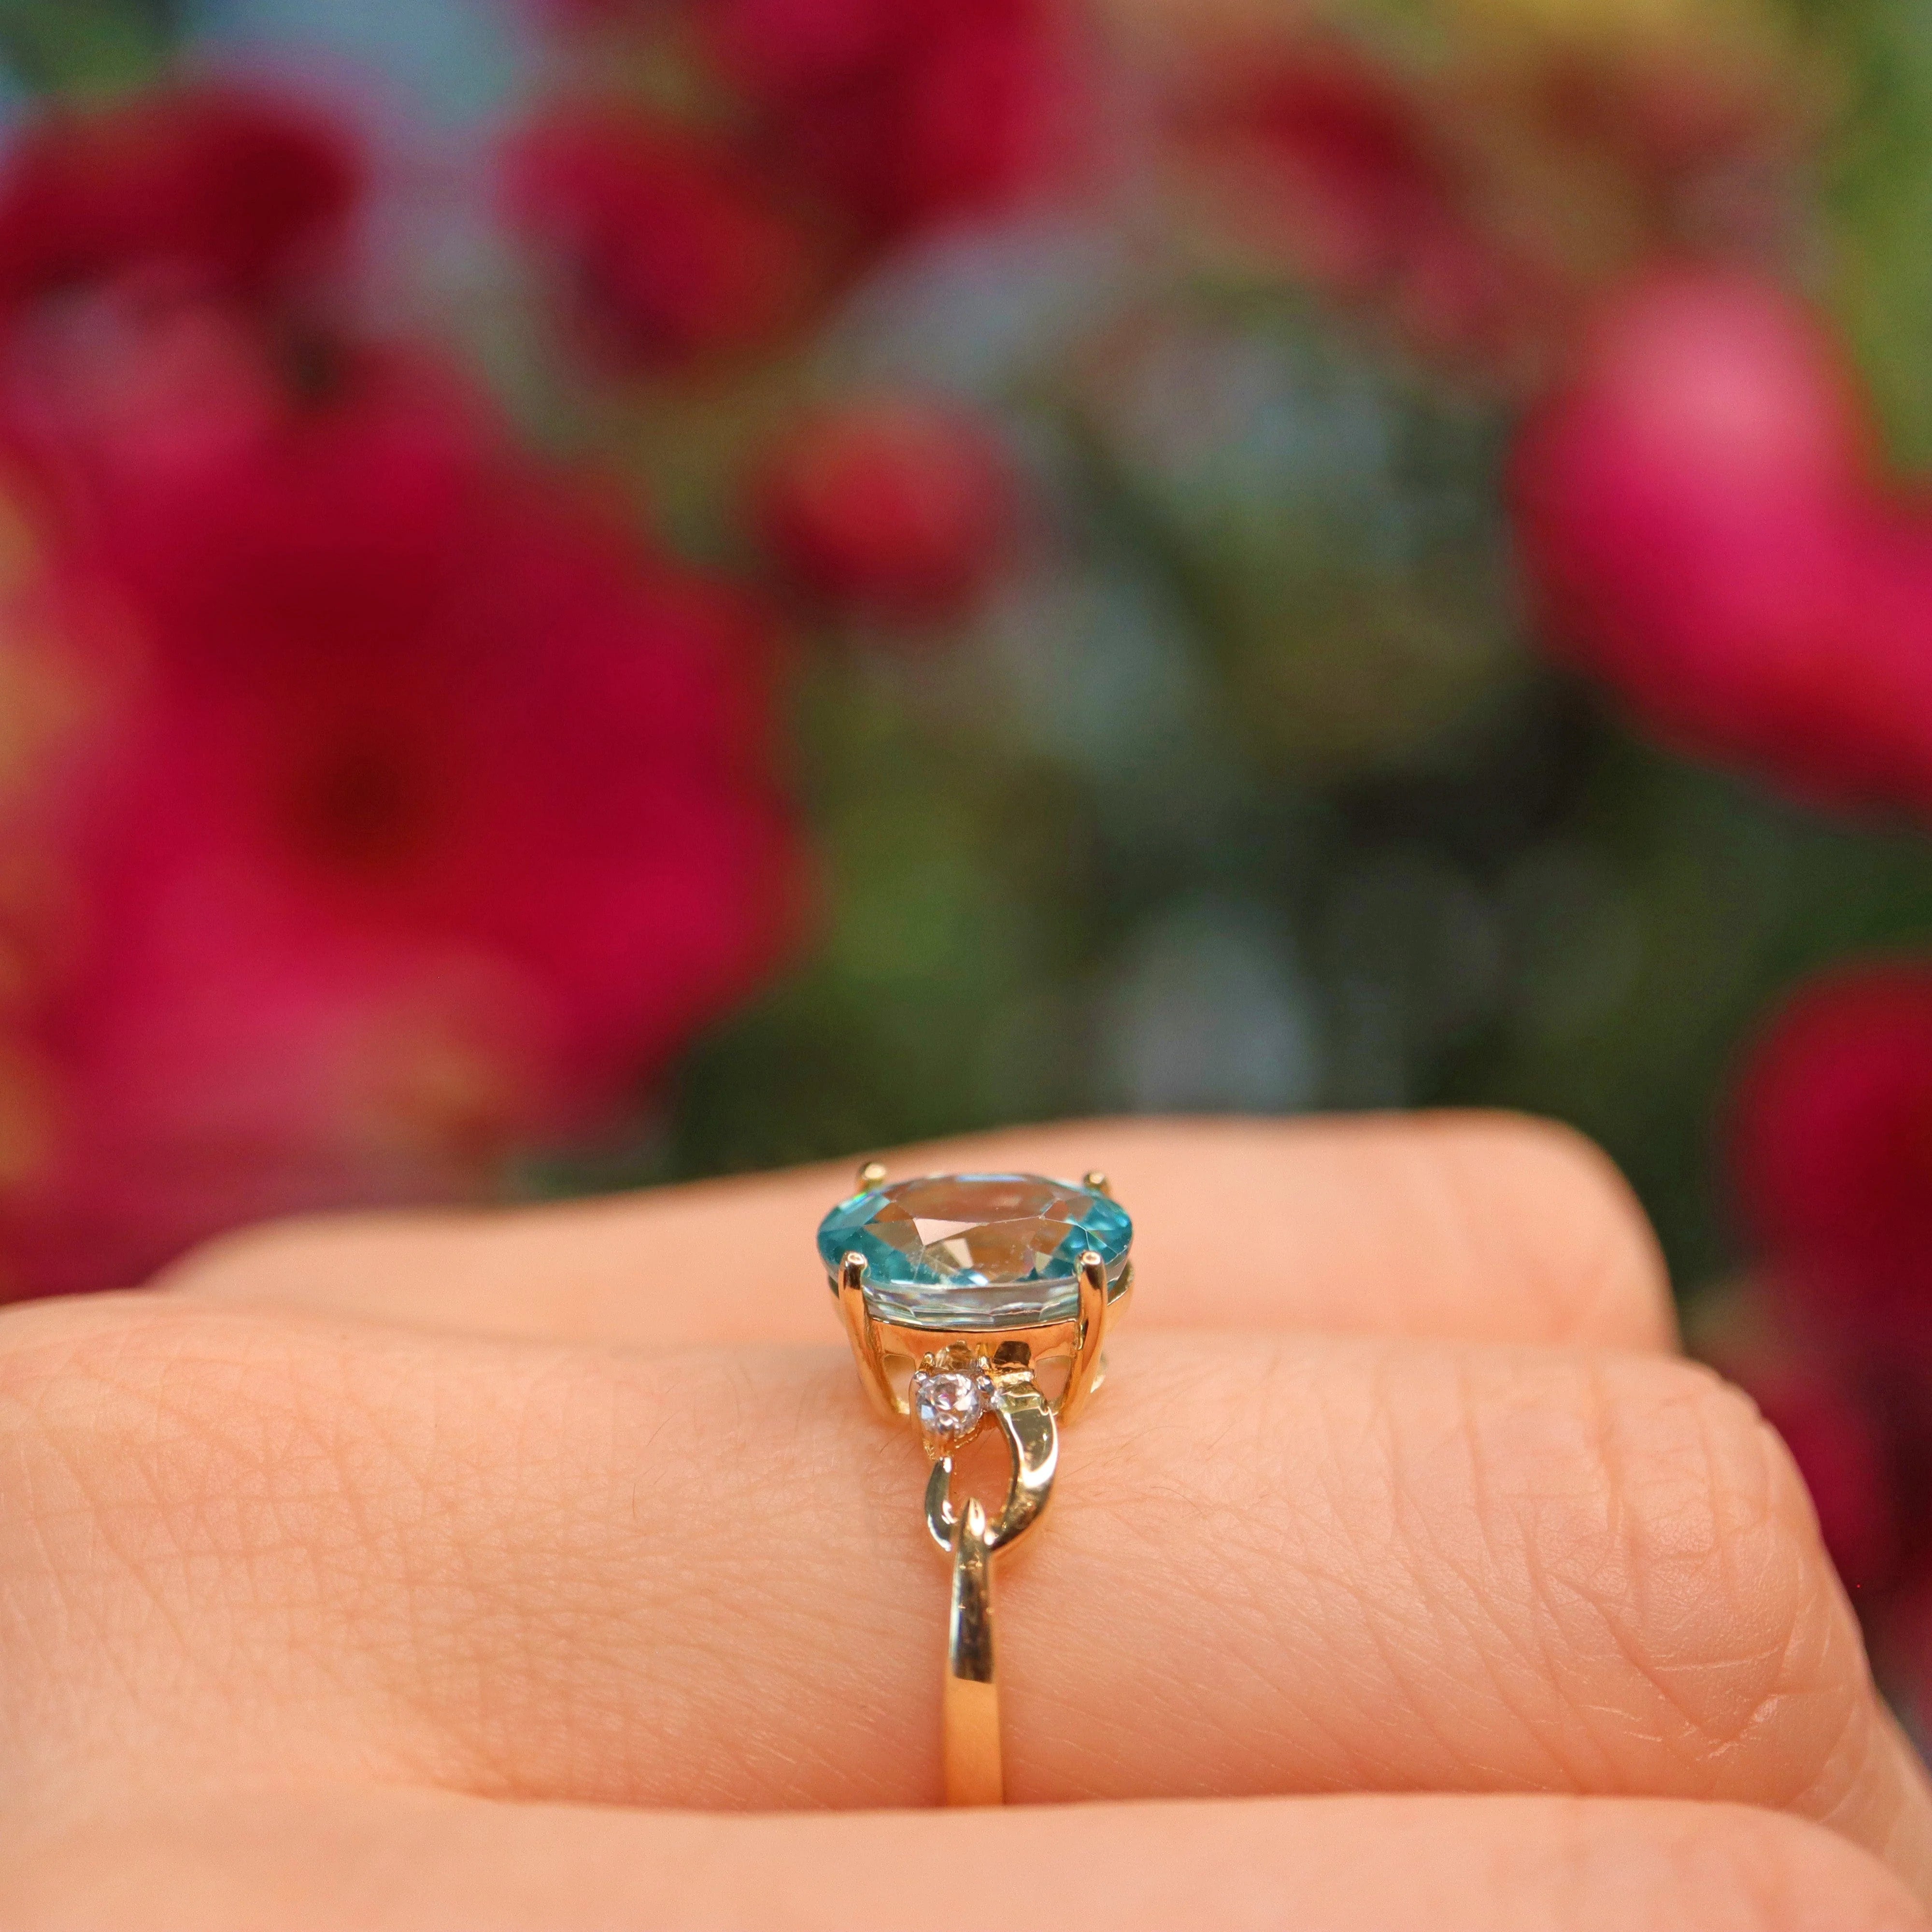 Ellibelle Jewellery Oval Cut Blue Zircon 9ct Yellow Gold Solitaire Ring